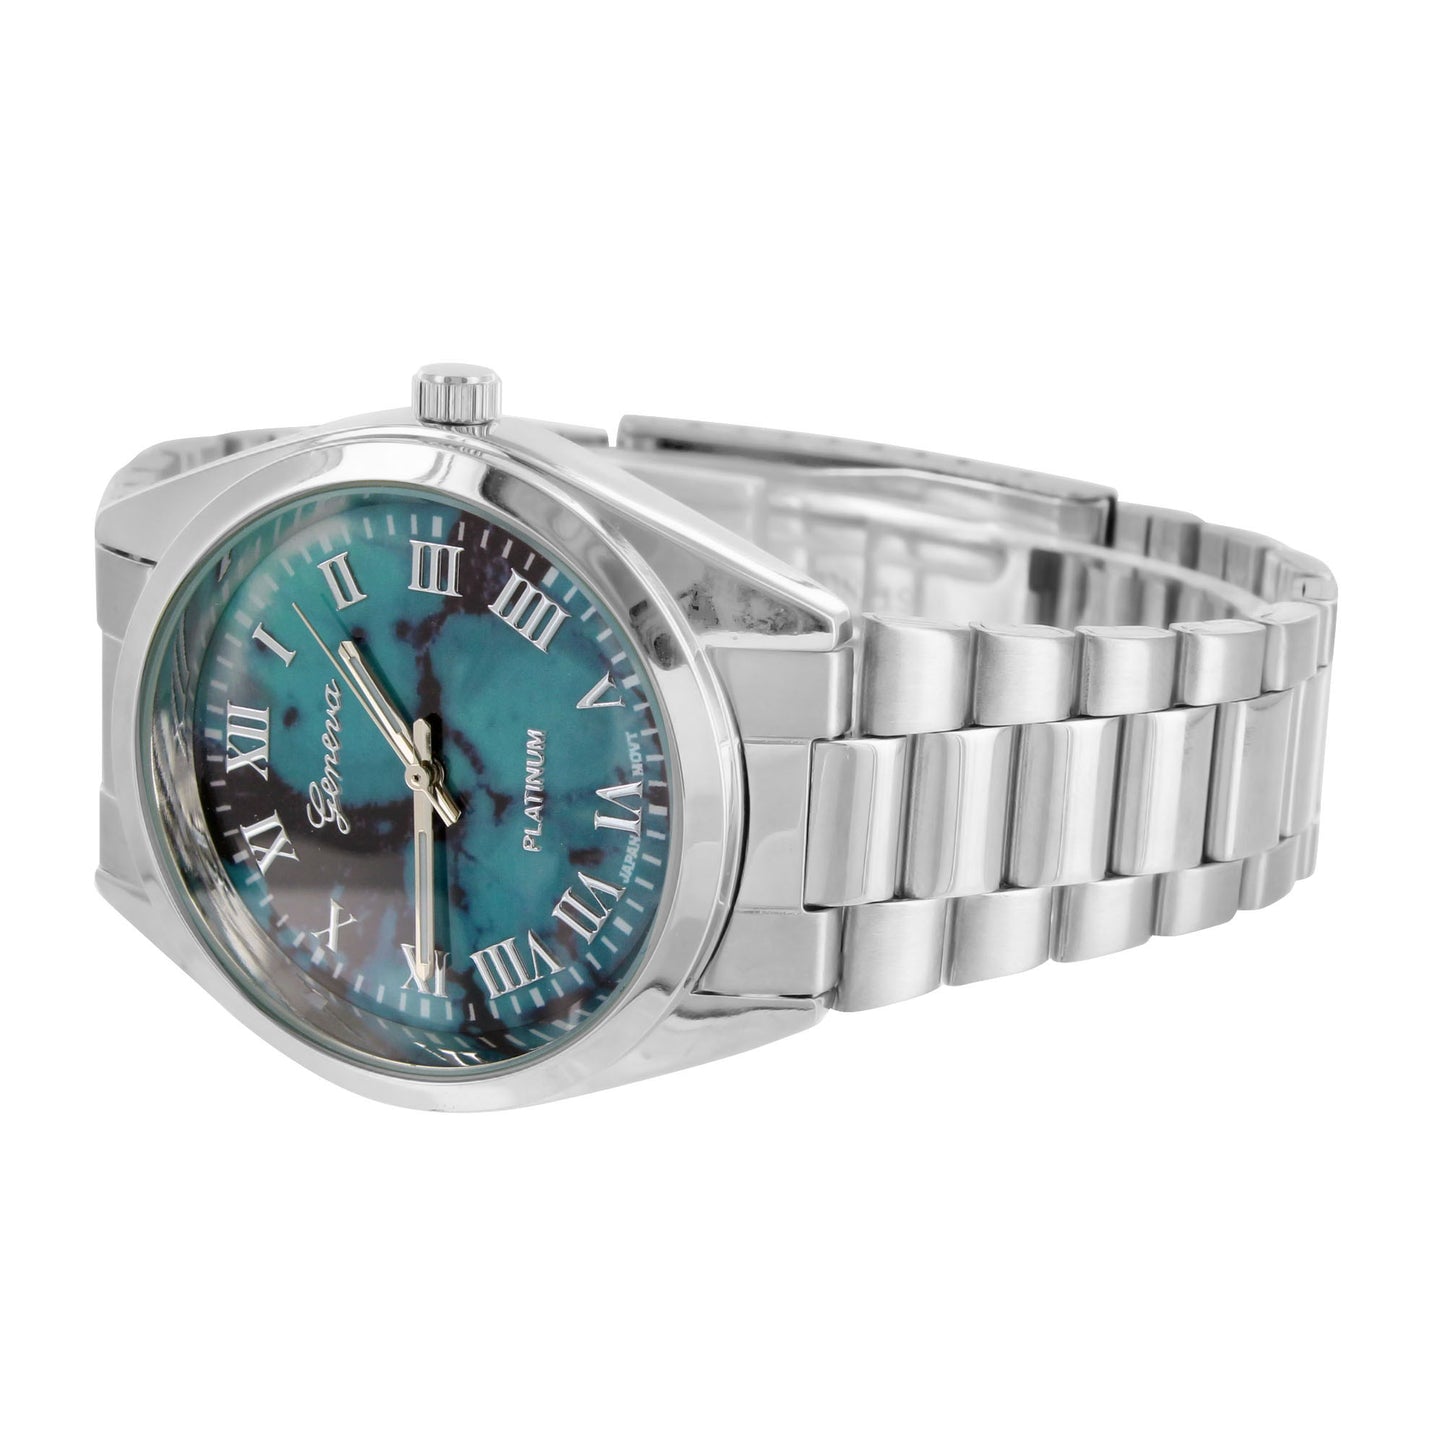 Turquoise Black Dial Watch Female Classic White Gold Tone Water Resist